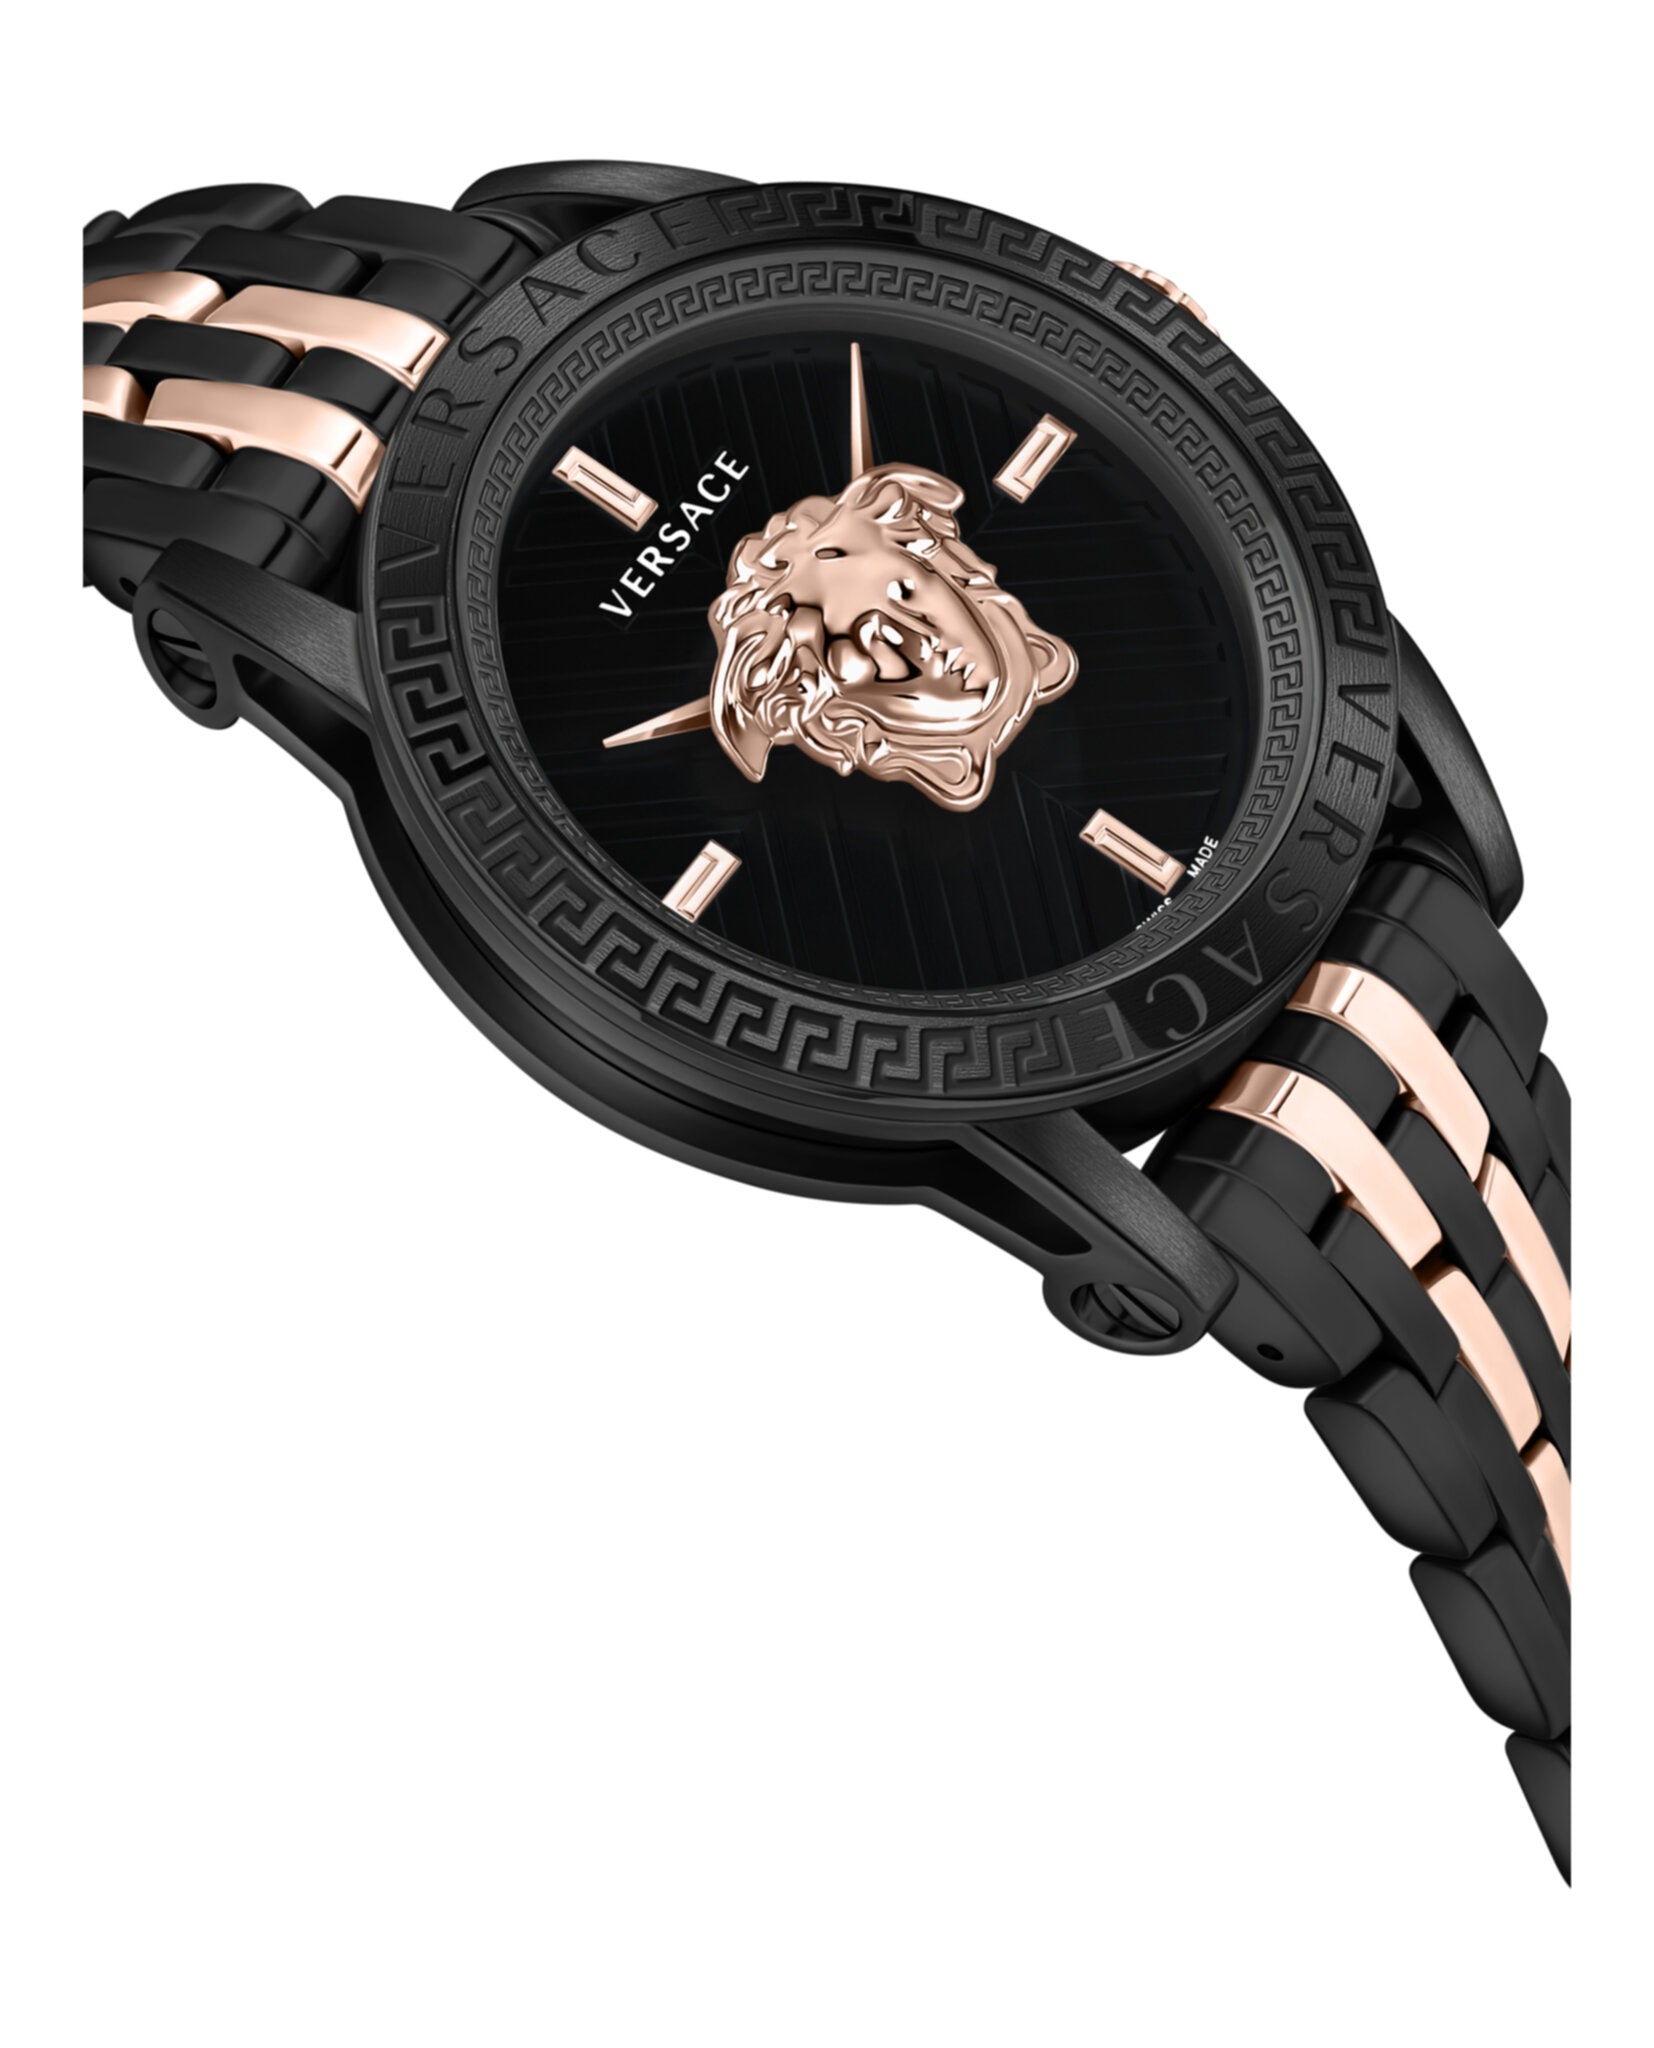 Versace Mens Watches | MadaLuxe Time – Madaluxe Time